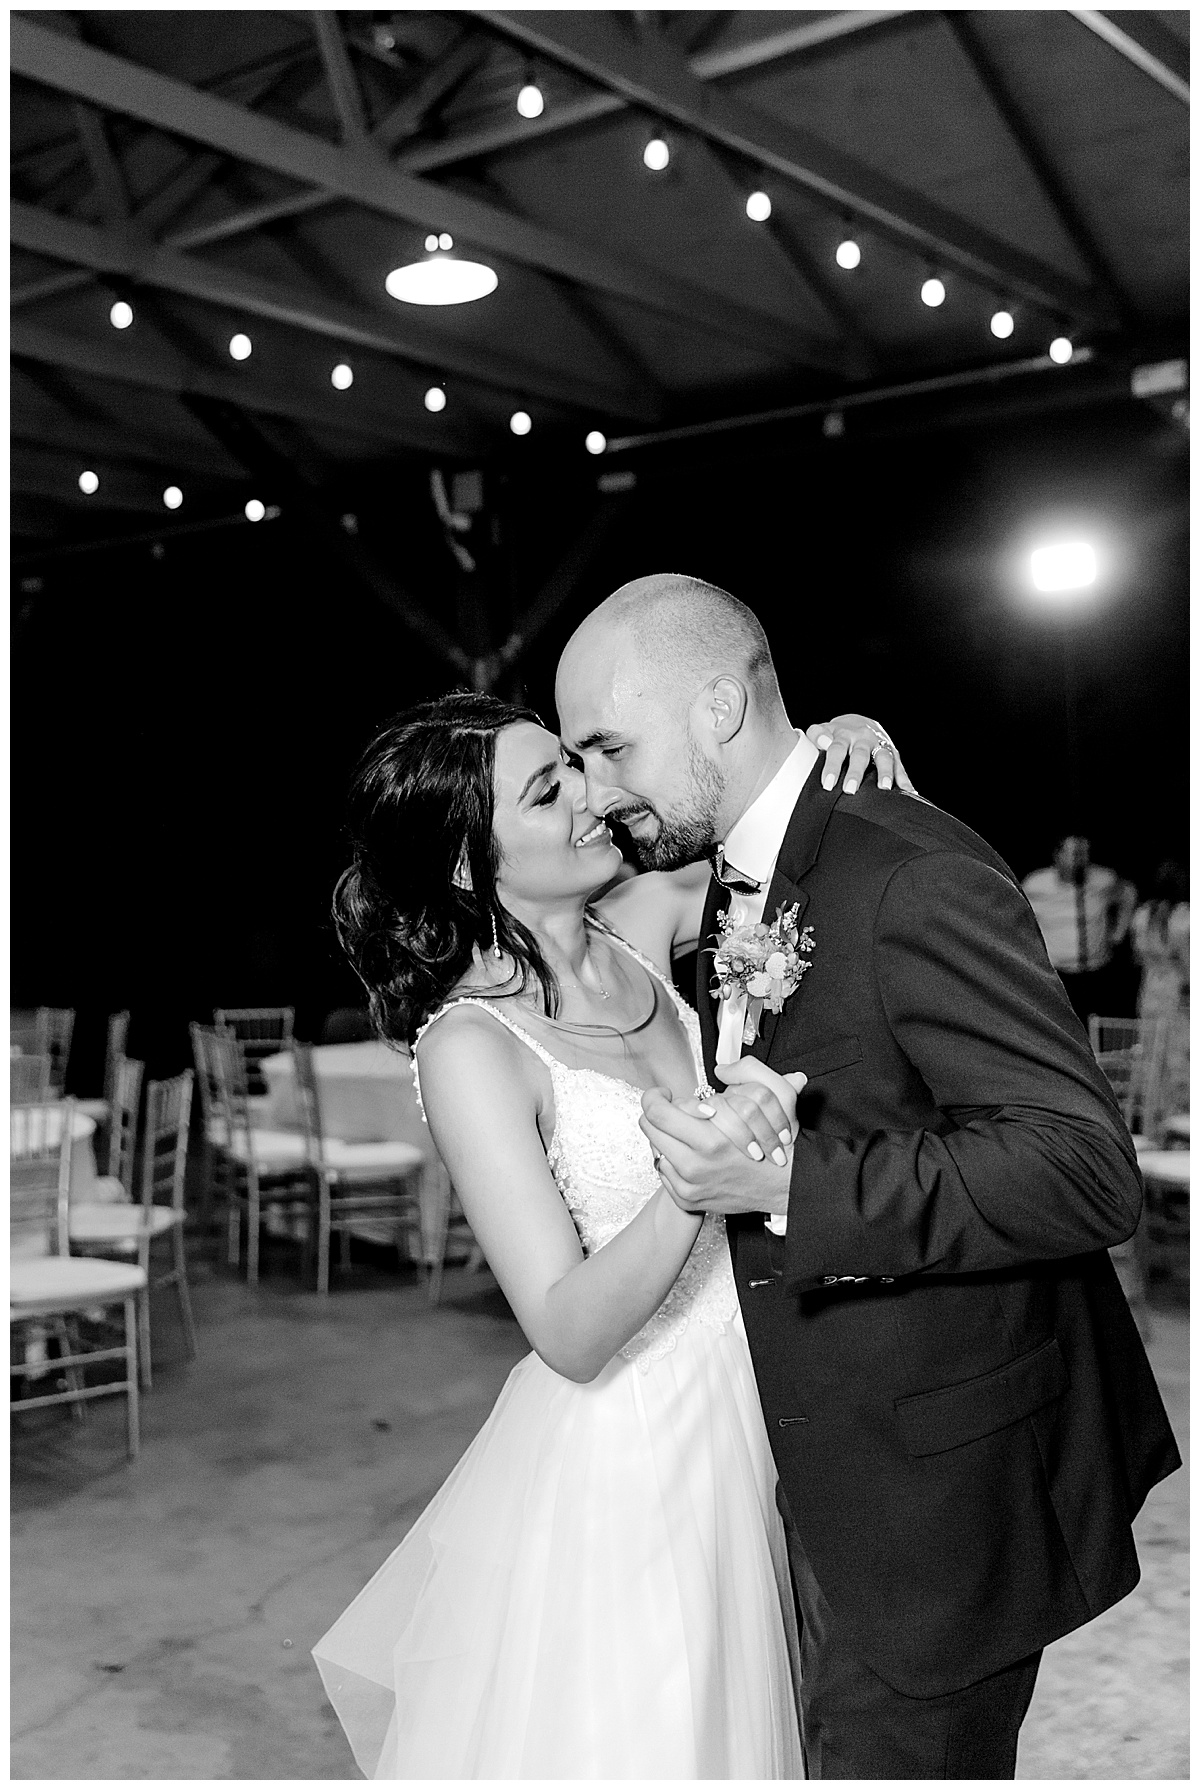 Sweet black and white shot of bride and groom dancing during their reception at Hyatt Regency Hill Country Resort Wedding in San Antonio, TX | San Antonio Wedding photographer| Destination Wedding Photographer| Monica Roberts Photography | monicaroberts.com